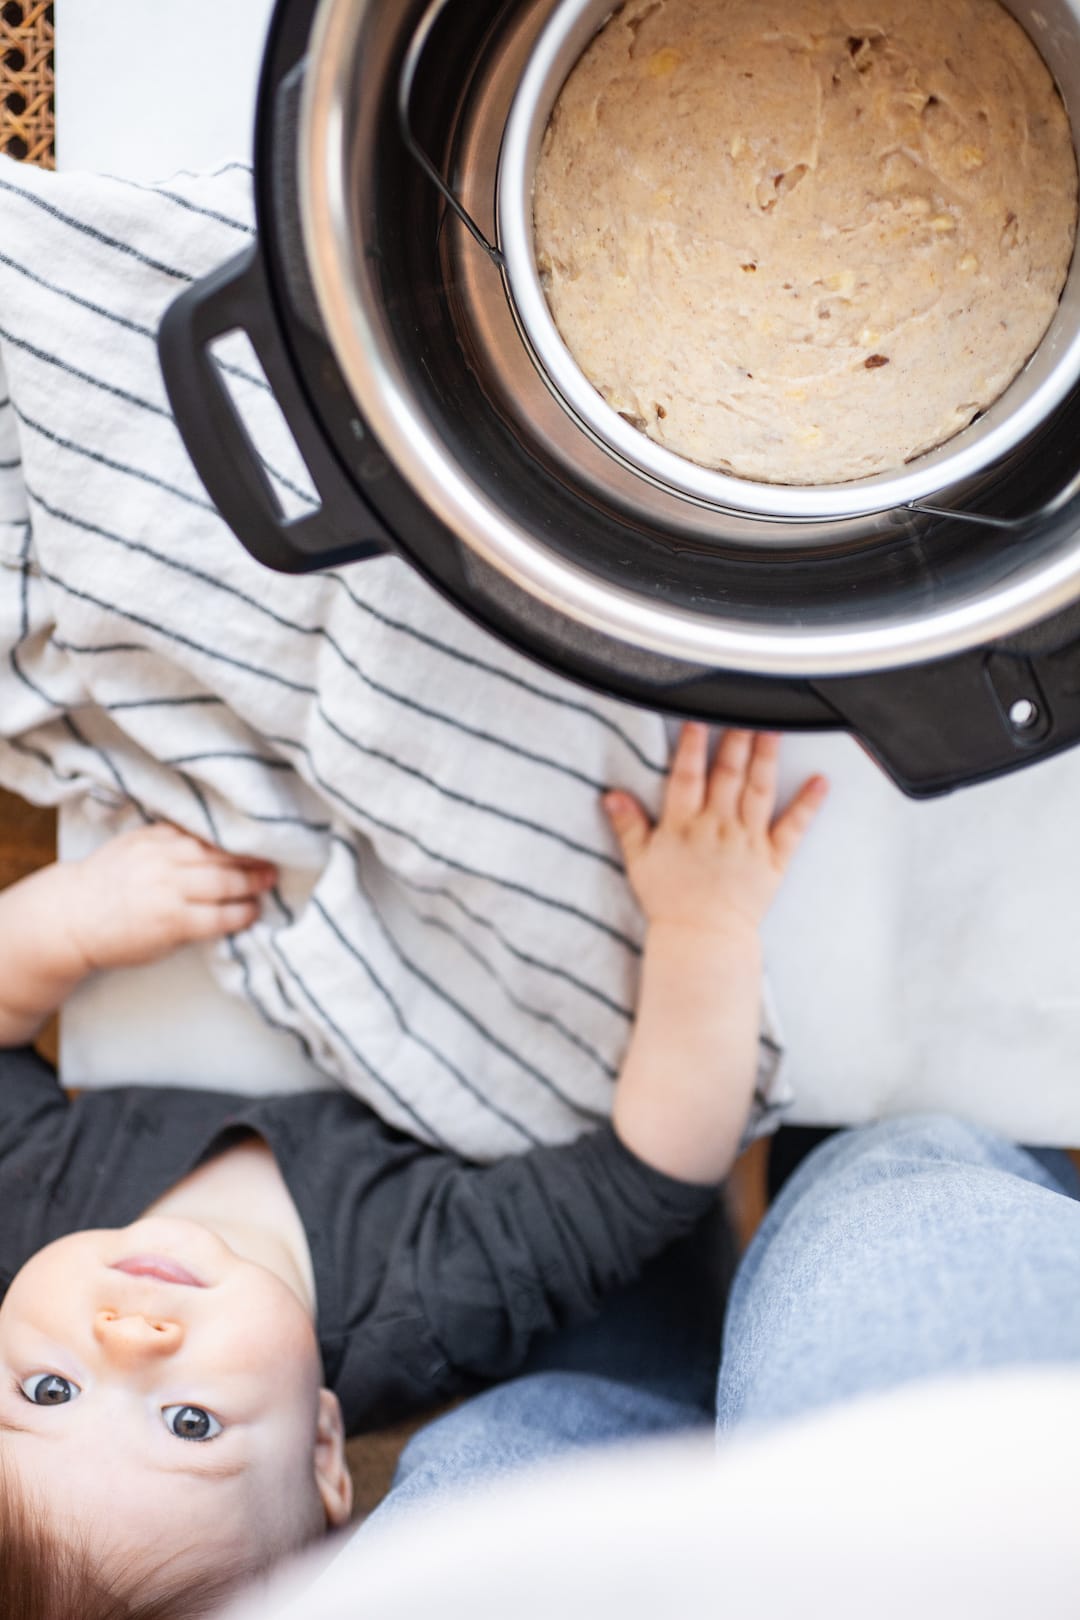 Cake pan sitting inside an instant pot filled with banana bread batter and a small child reaching for it